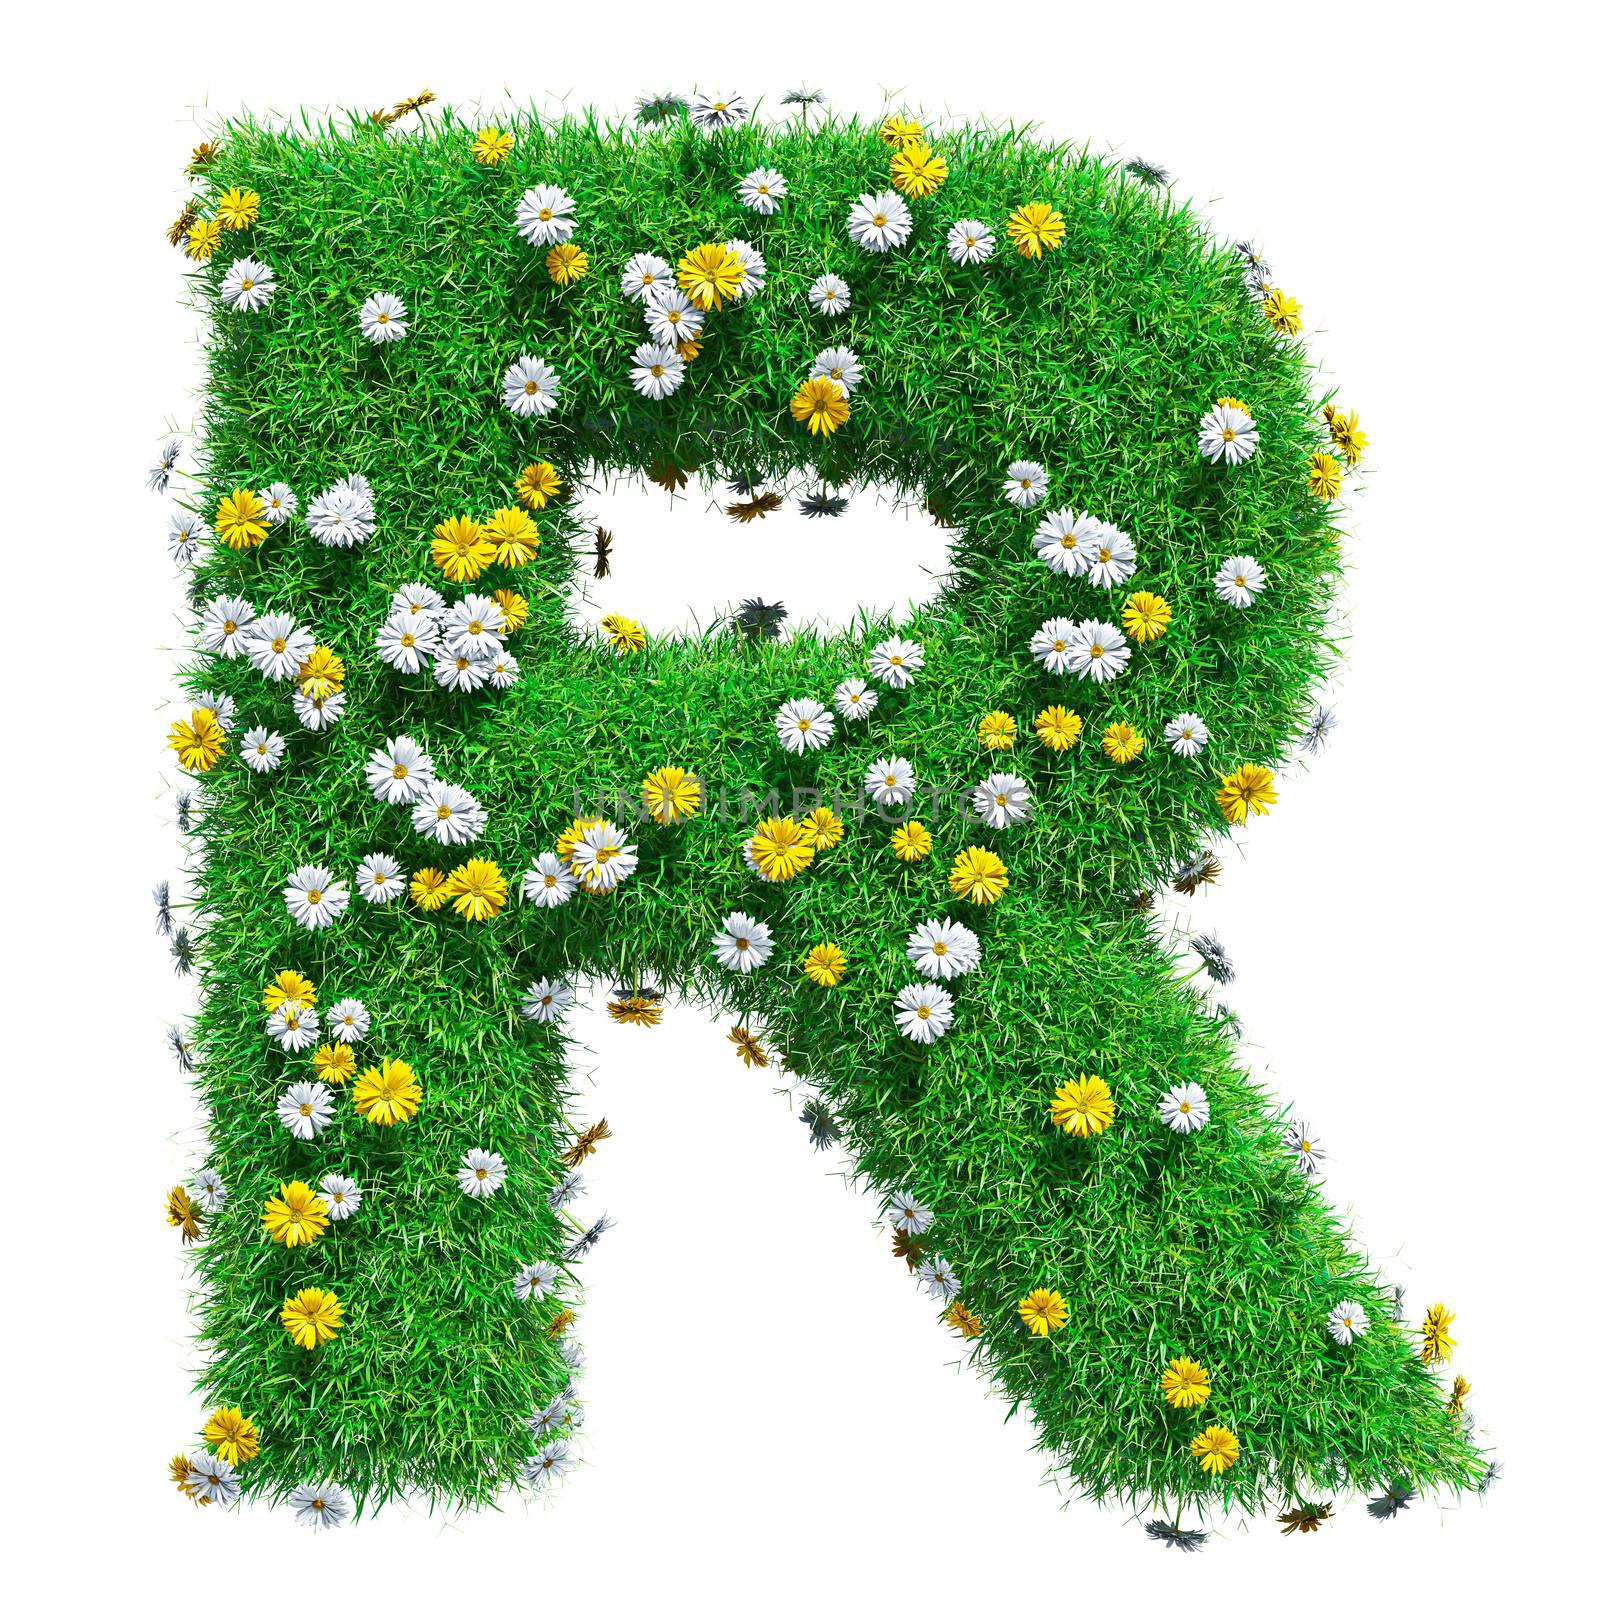 Letter R Of Green Grass And Flowers. Isolated On White Background. Font For Your Design. 3D Illustration